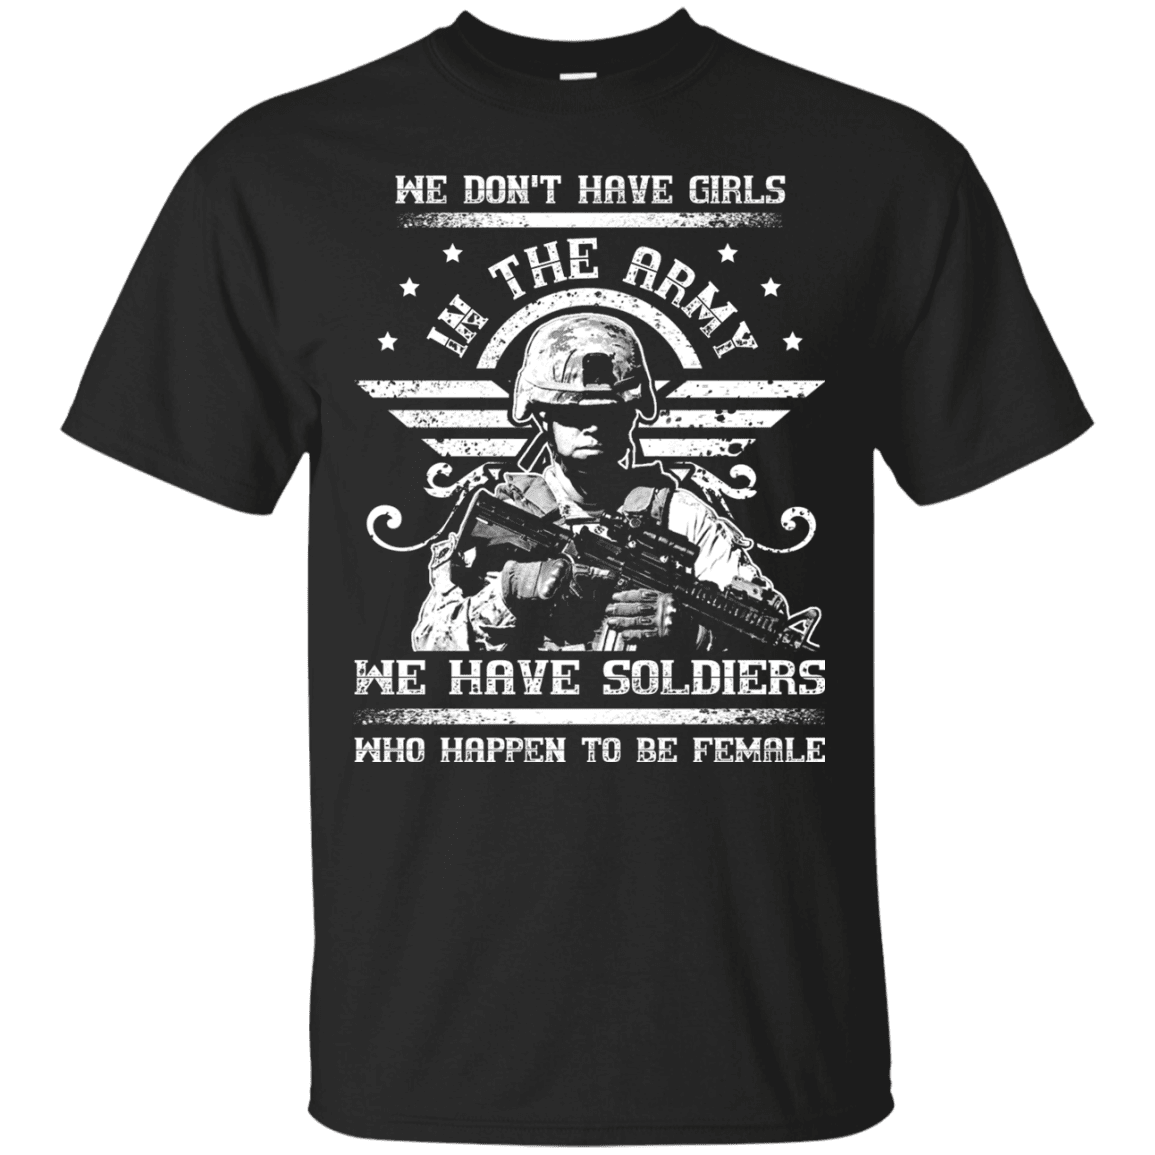 We have Female Soldiers In The Army Front T Shirts-TShirt-Army-Veterans Nation